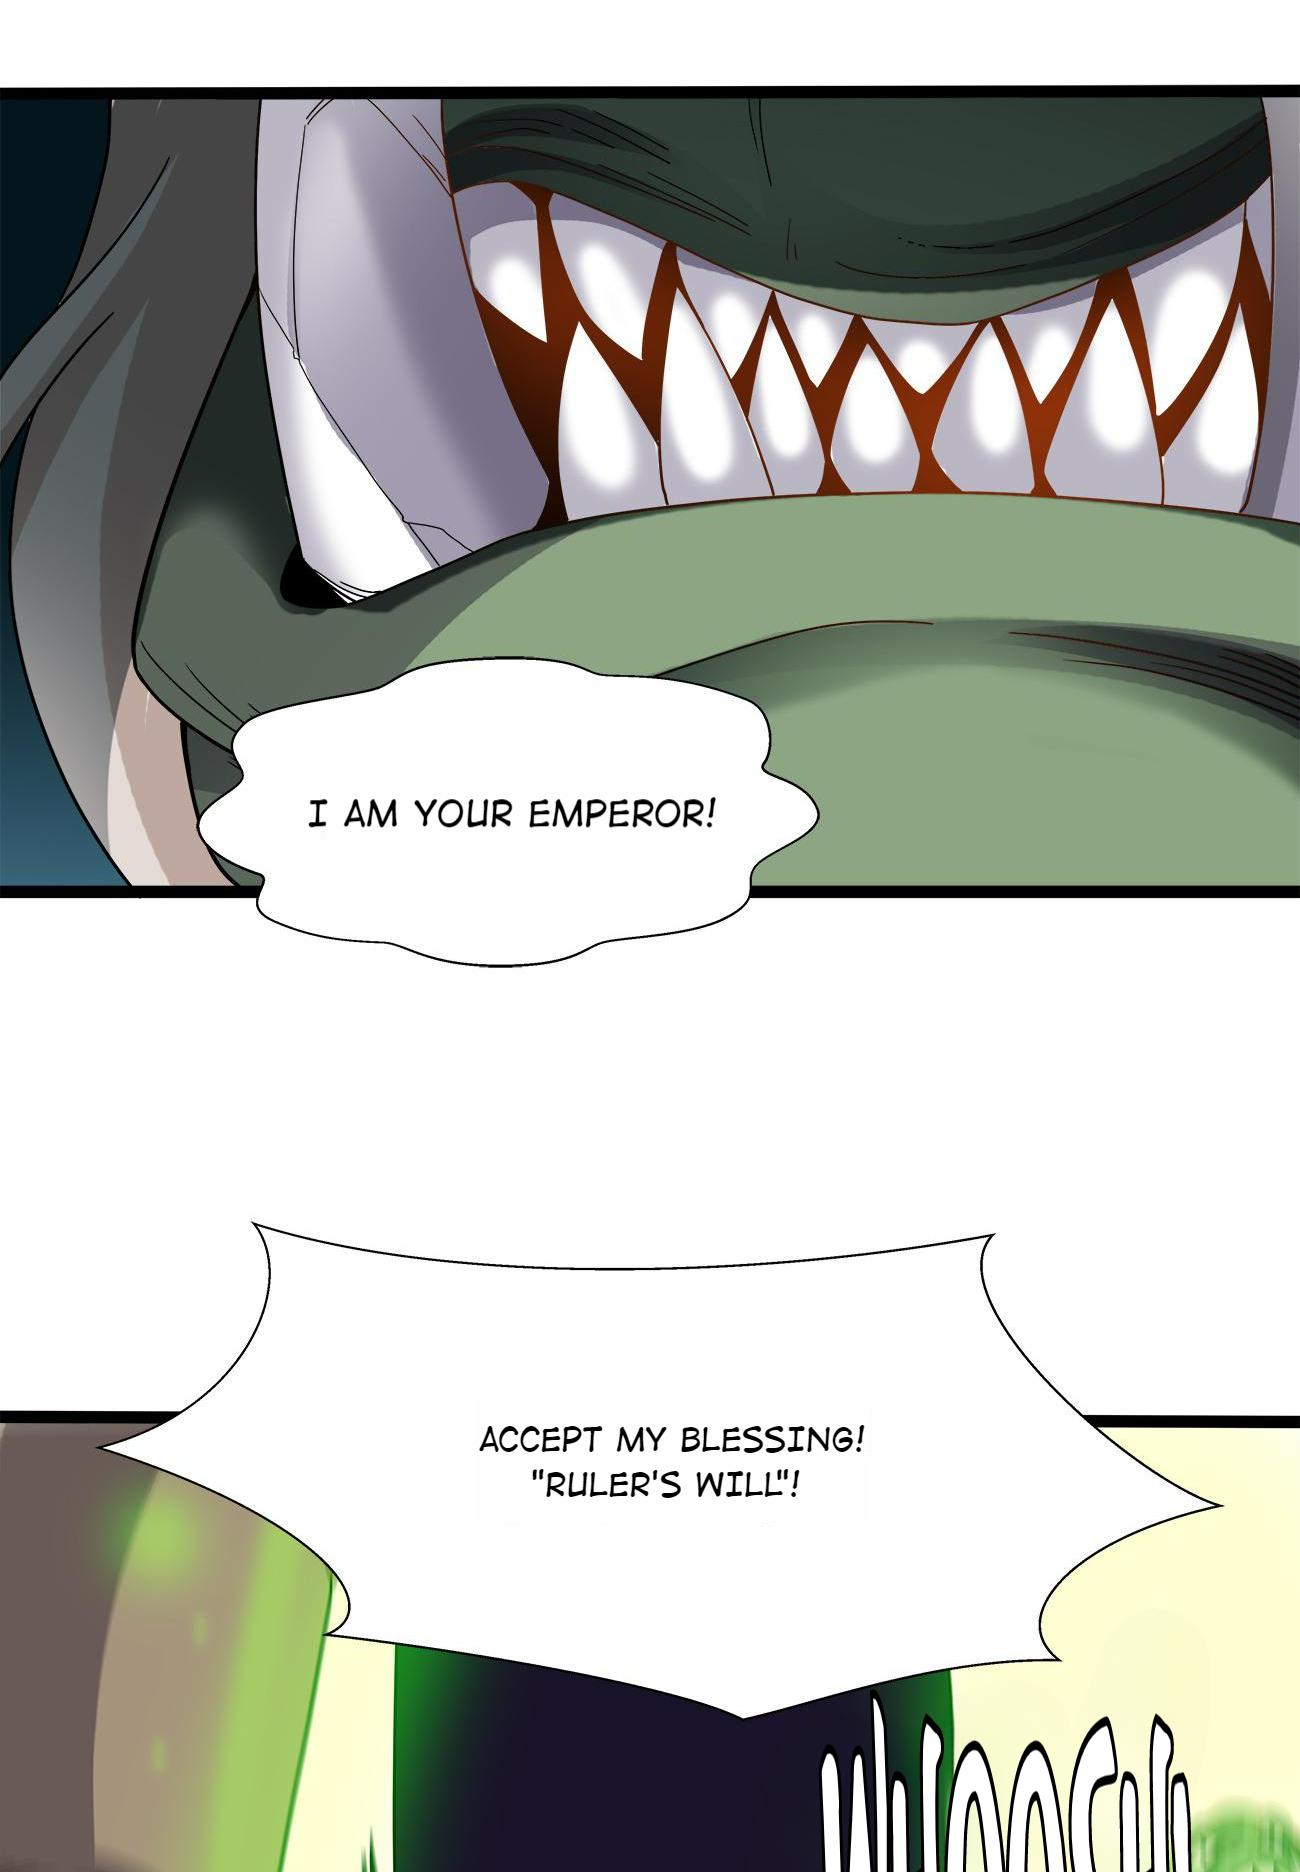 Princess, Please Stay Away From Me! - Page 2